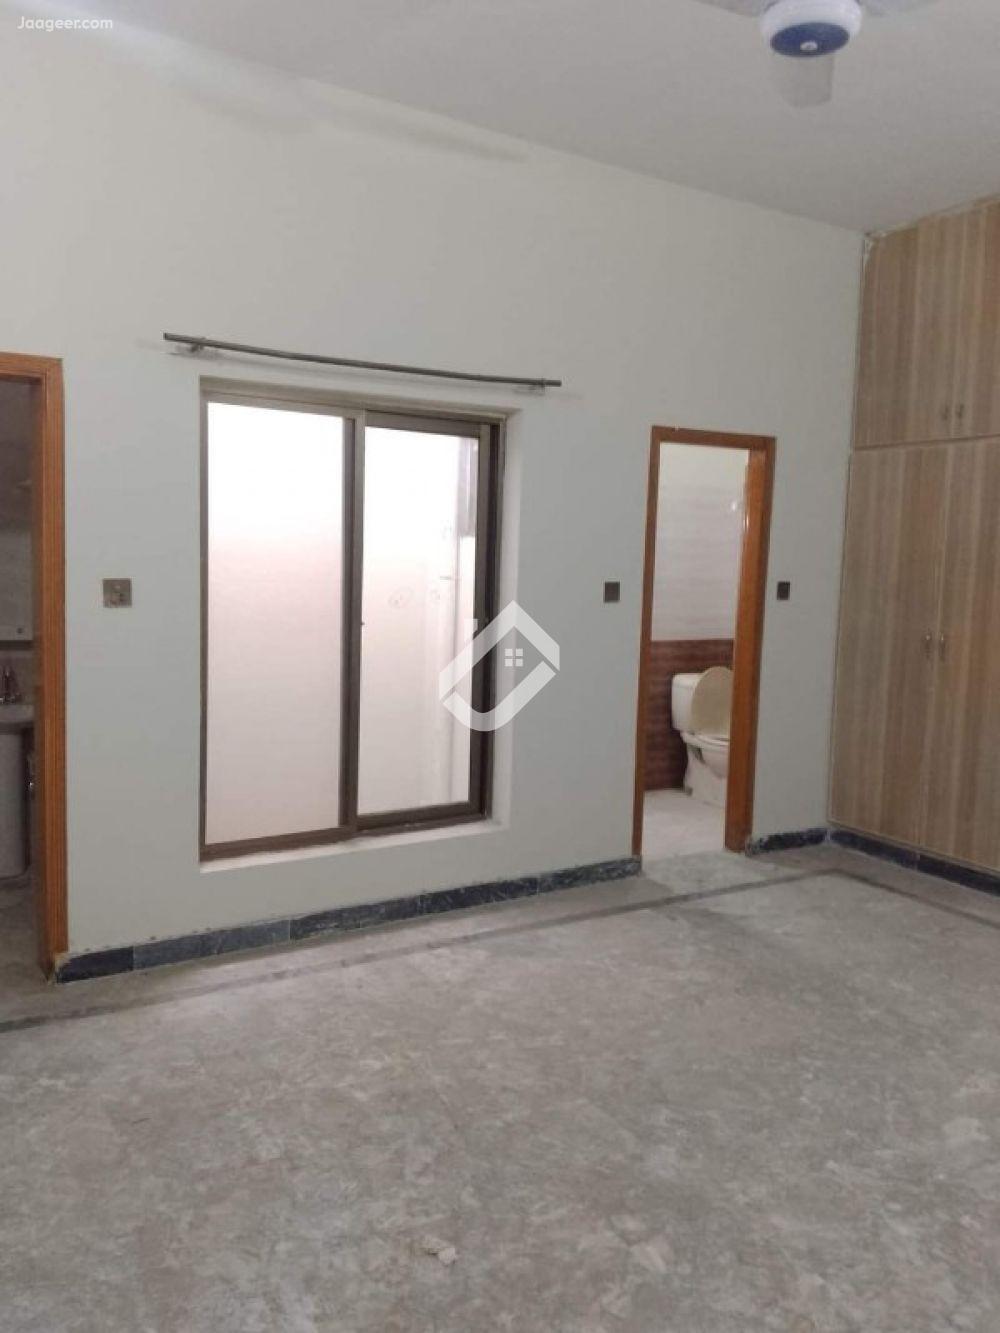 View  5 Marla Upper Portion House For Rent In Faisal Colony in Faisal Colony, Islamabad